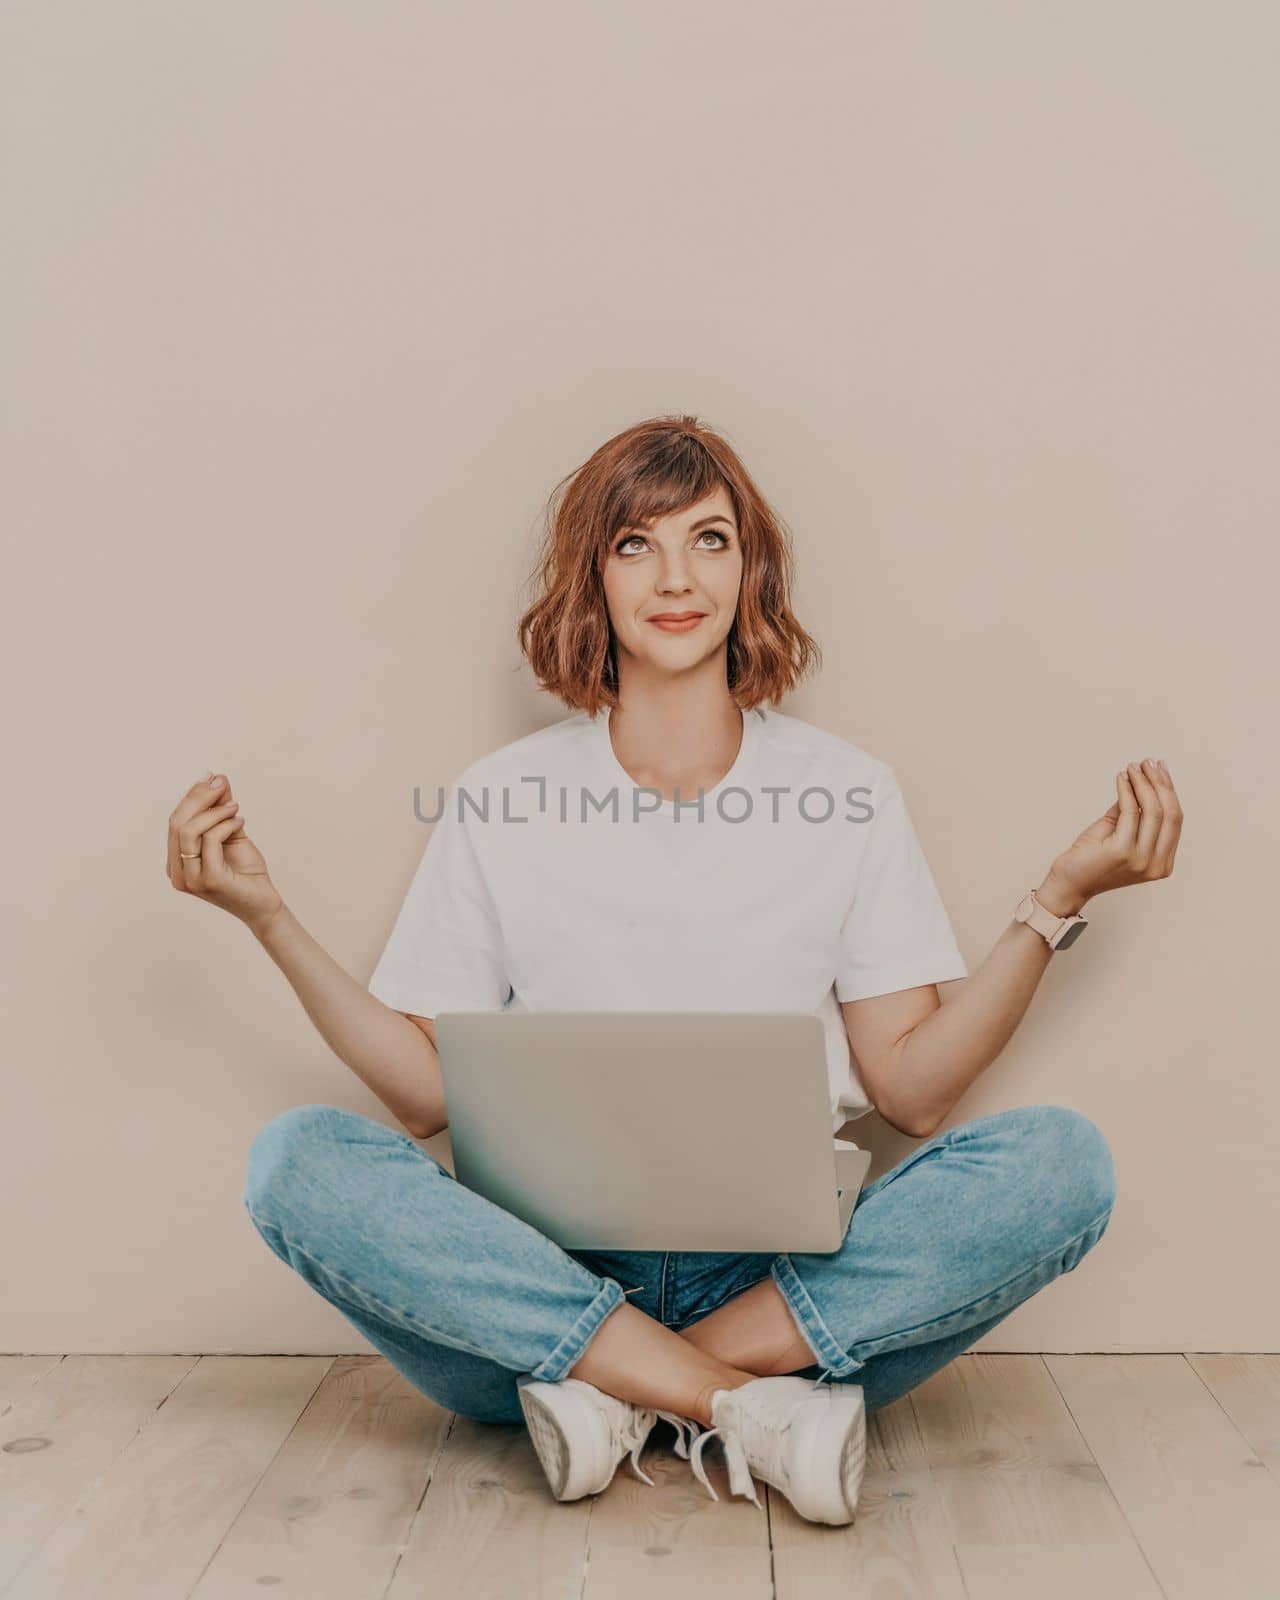 A brunette sits on the floor with a laptop on a beige wall background. She is wearing a white T-shirt, jeans and white sneakers